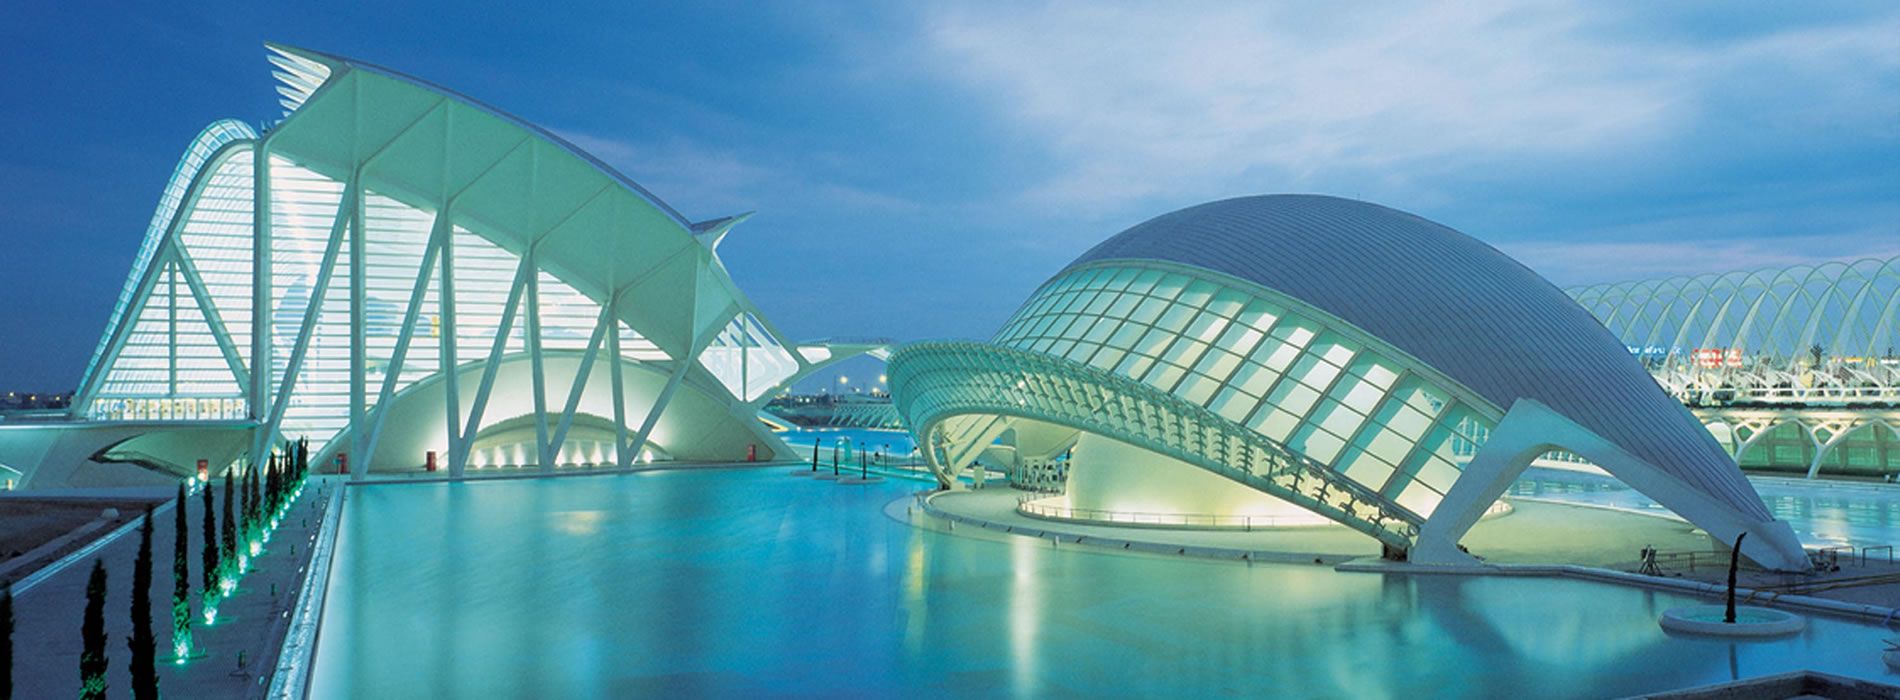 City Of Arts And Sciences HD wallpapers, Desktop wallpaper - most viewed